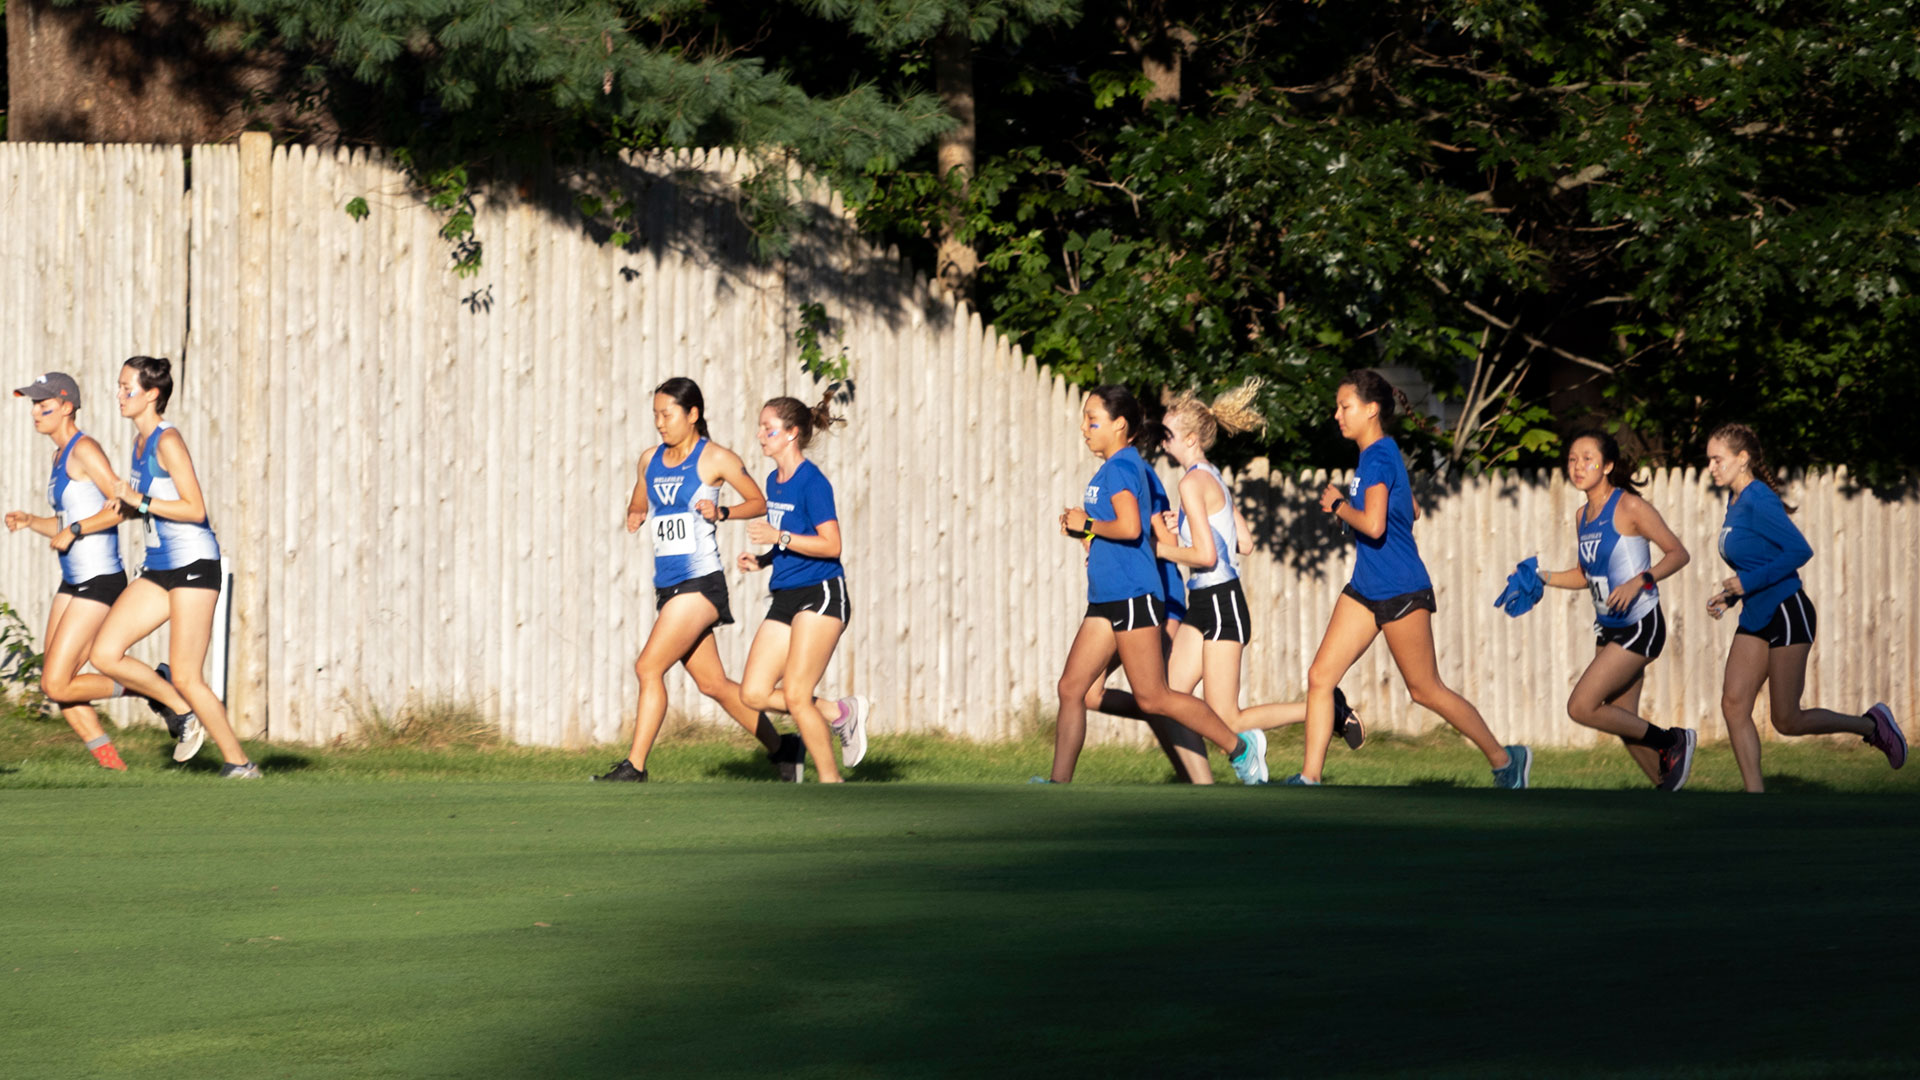 Wellesley cross country team running together